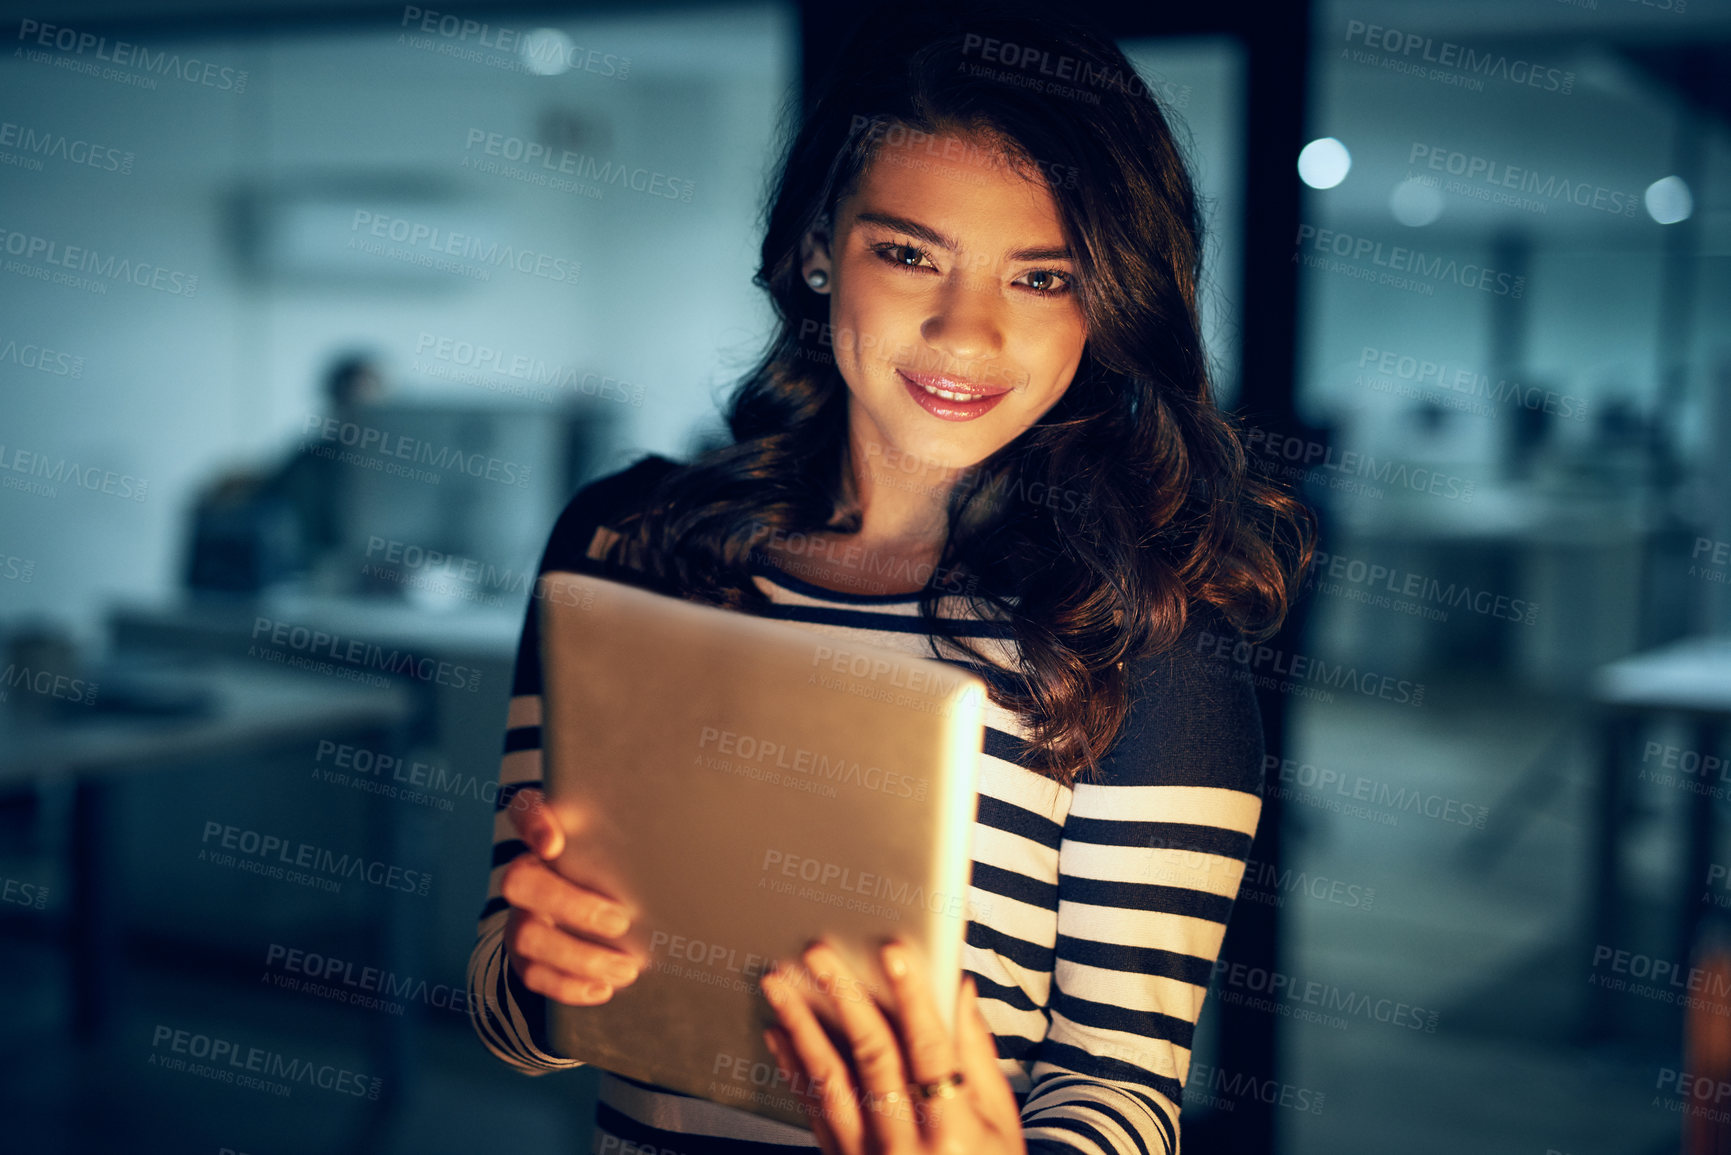 Buy stock photo Portrait of a young businesswoman working late on a digital tablet in an office